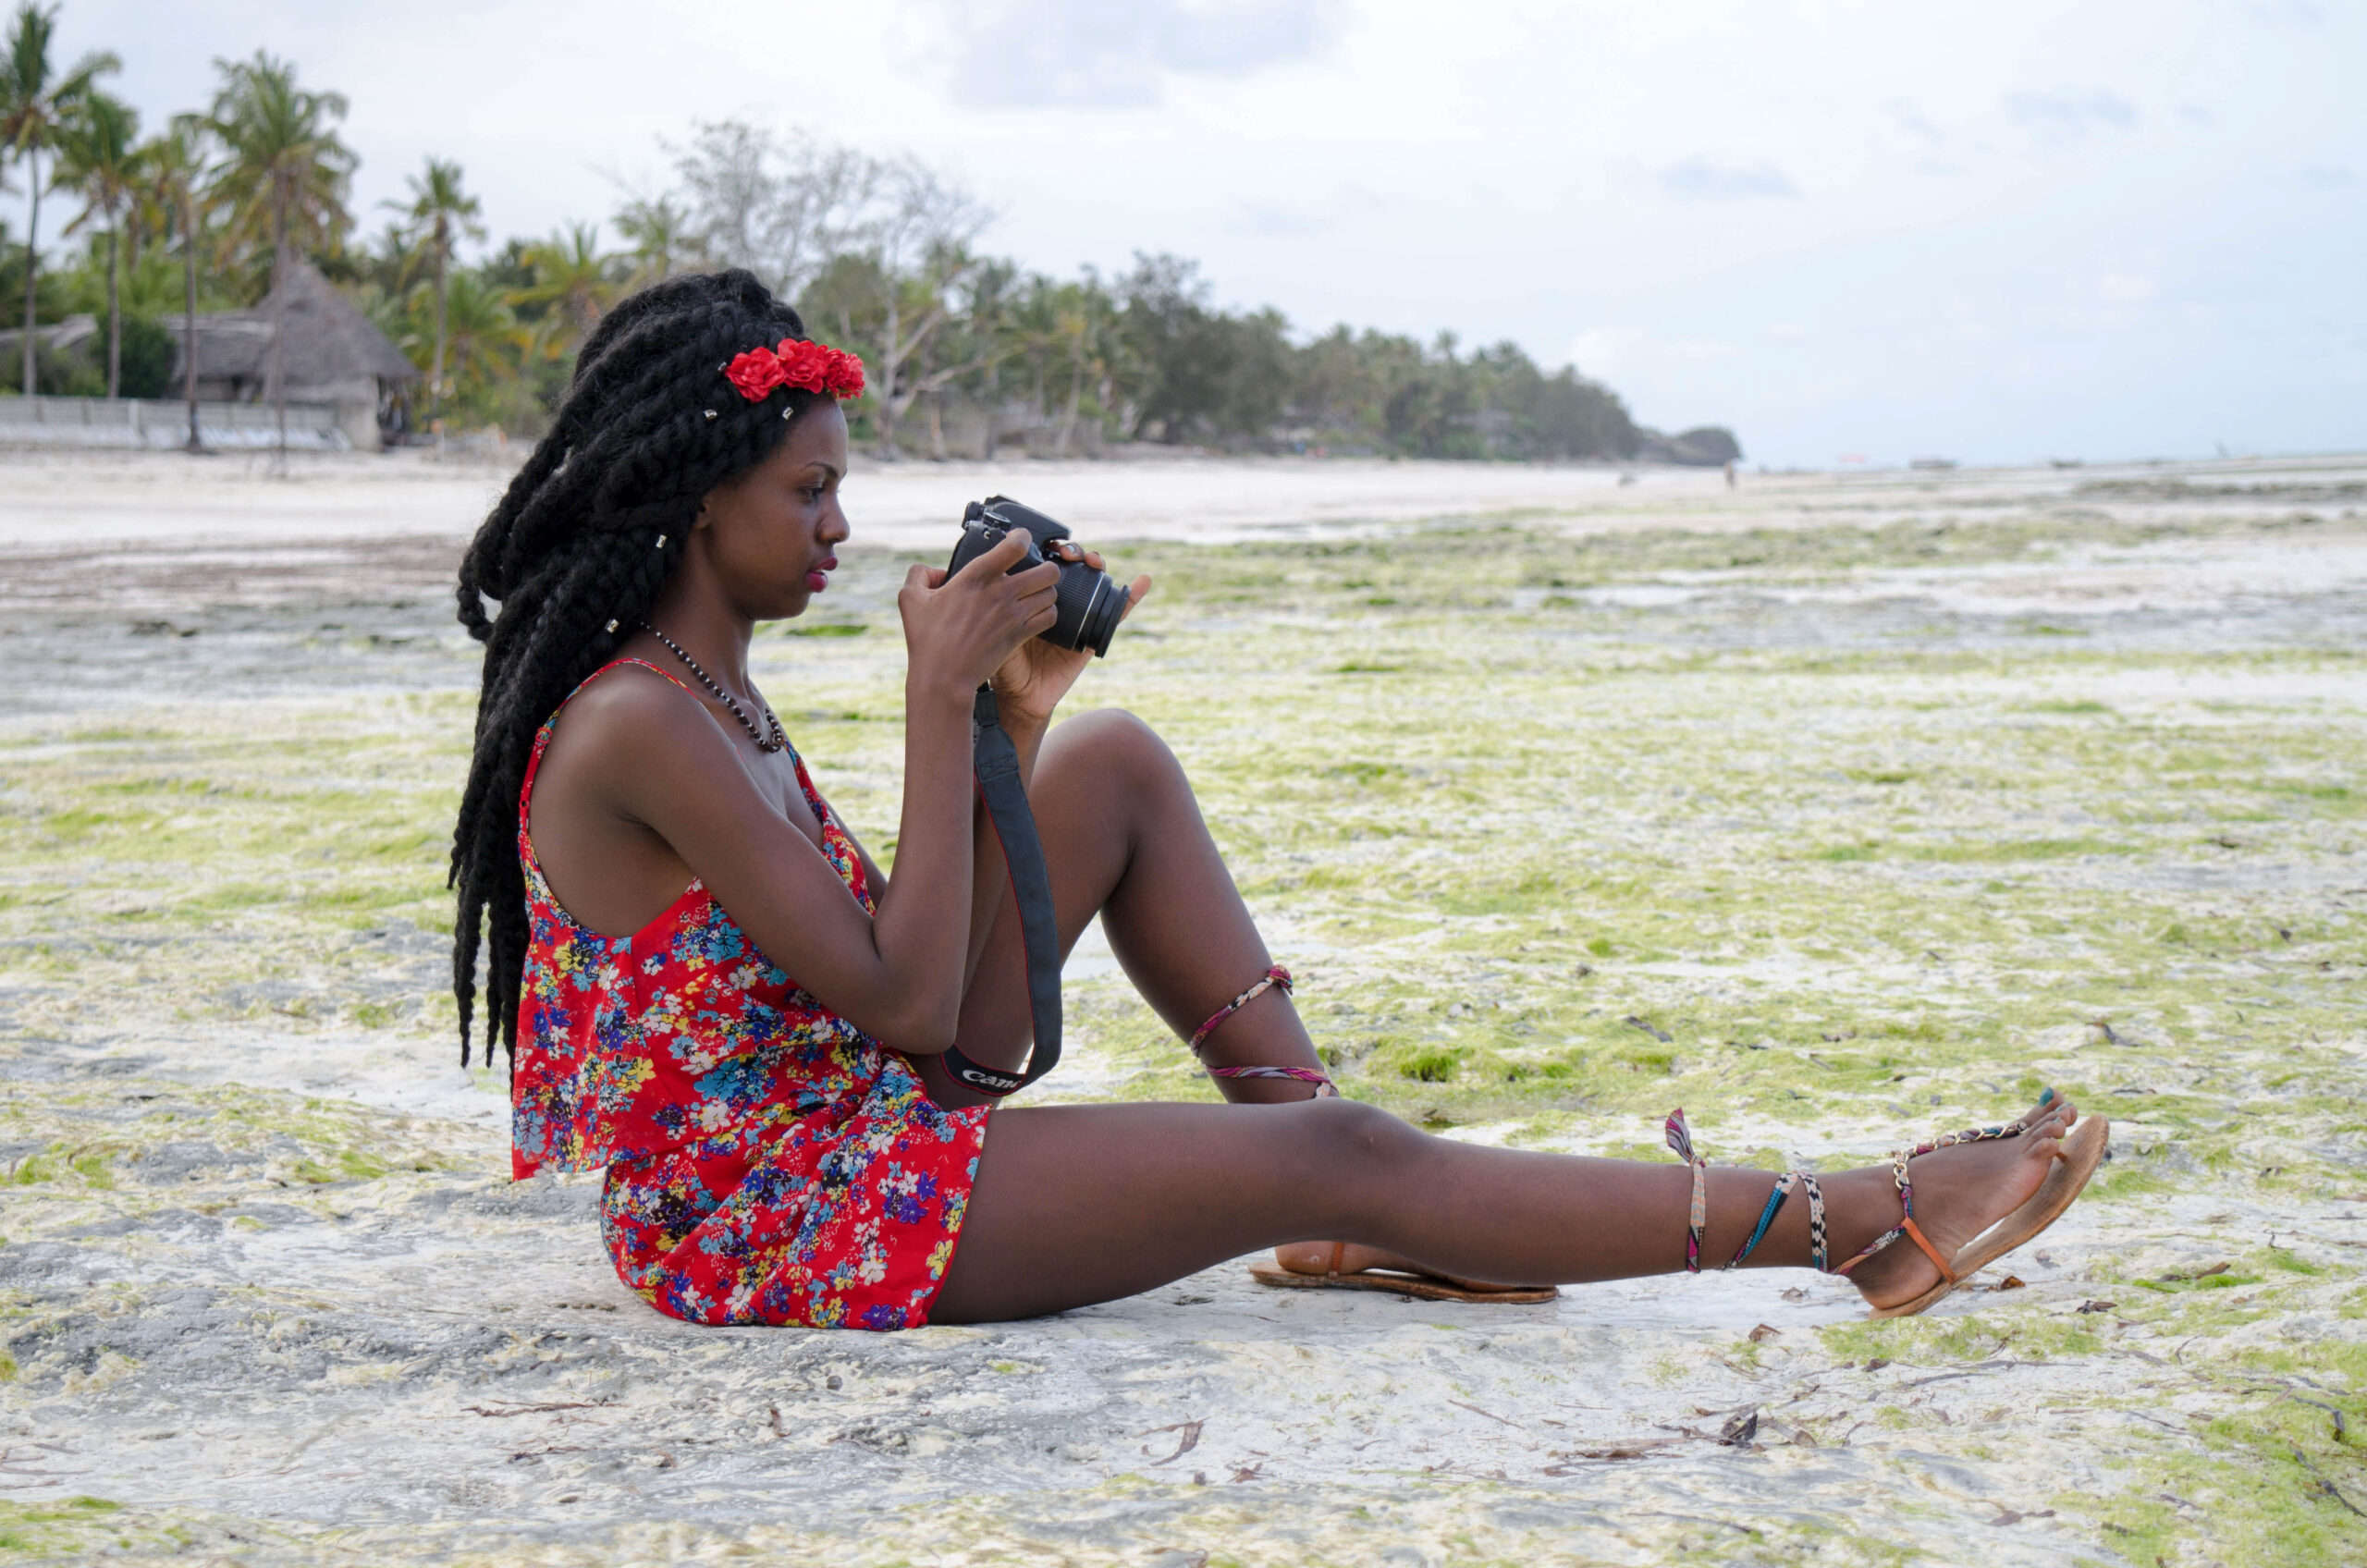 8 Things To Do When You Travel Solo For The First Time